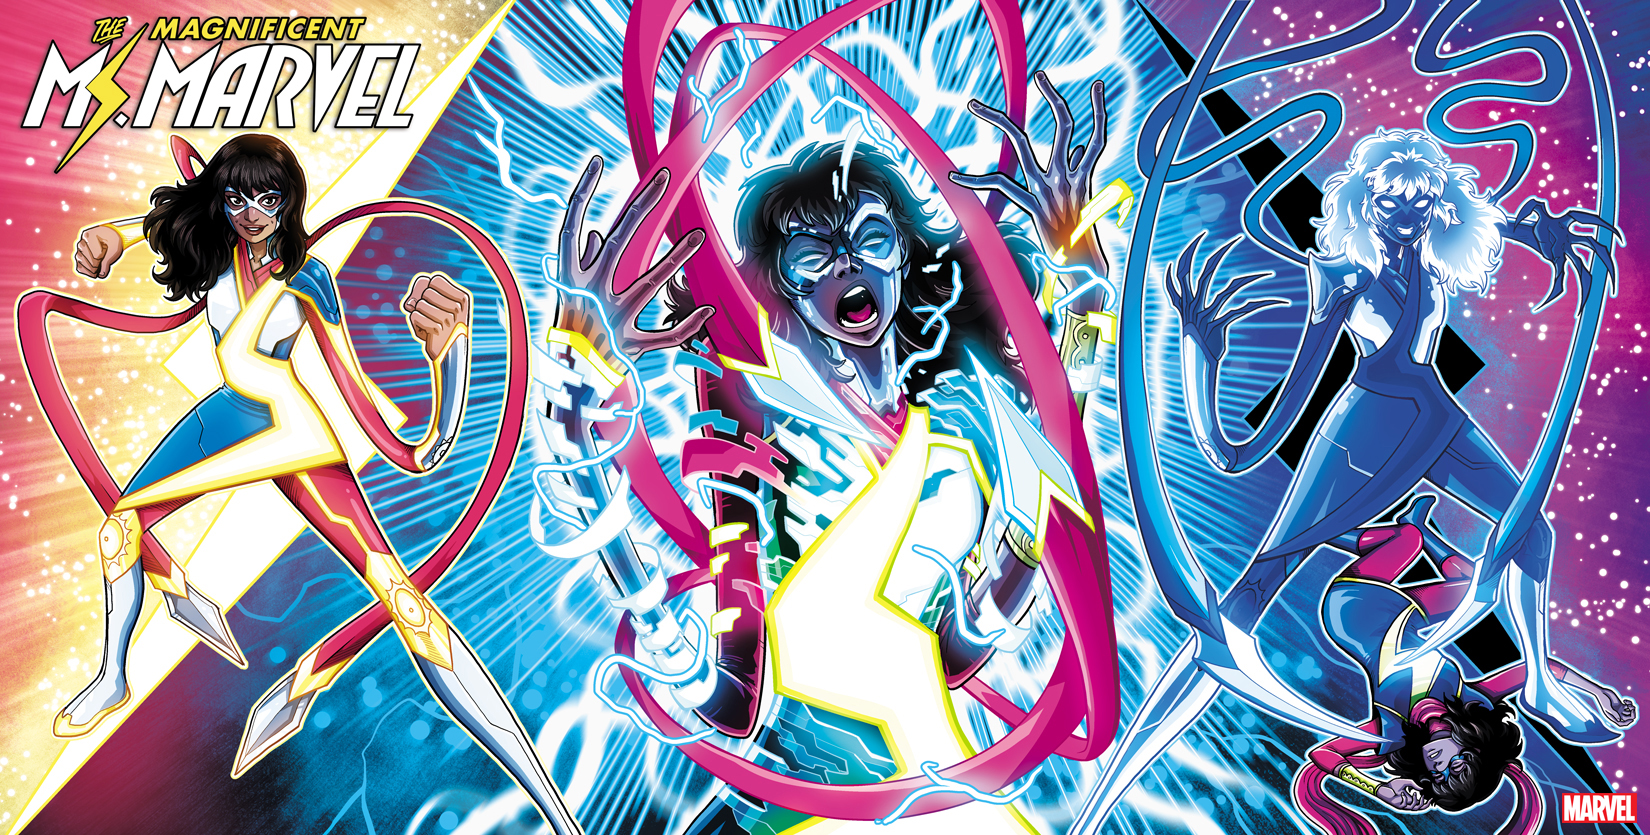 'Magnificent Ms. Marvel' gets 2nd printing and Luciano Vecchio variant covers